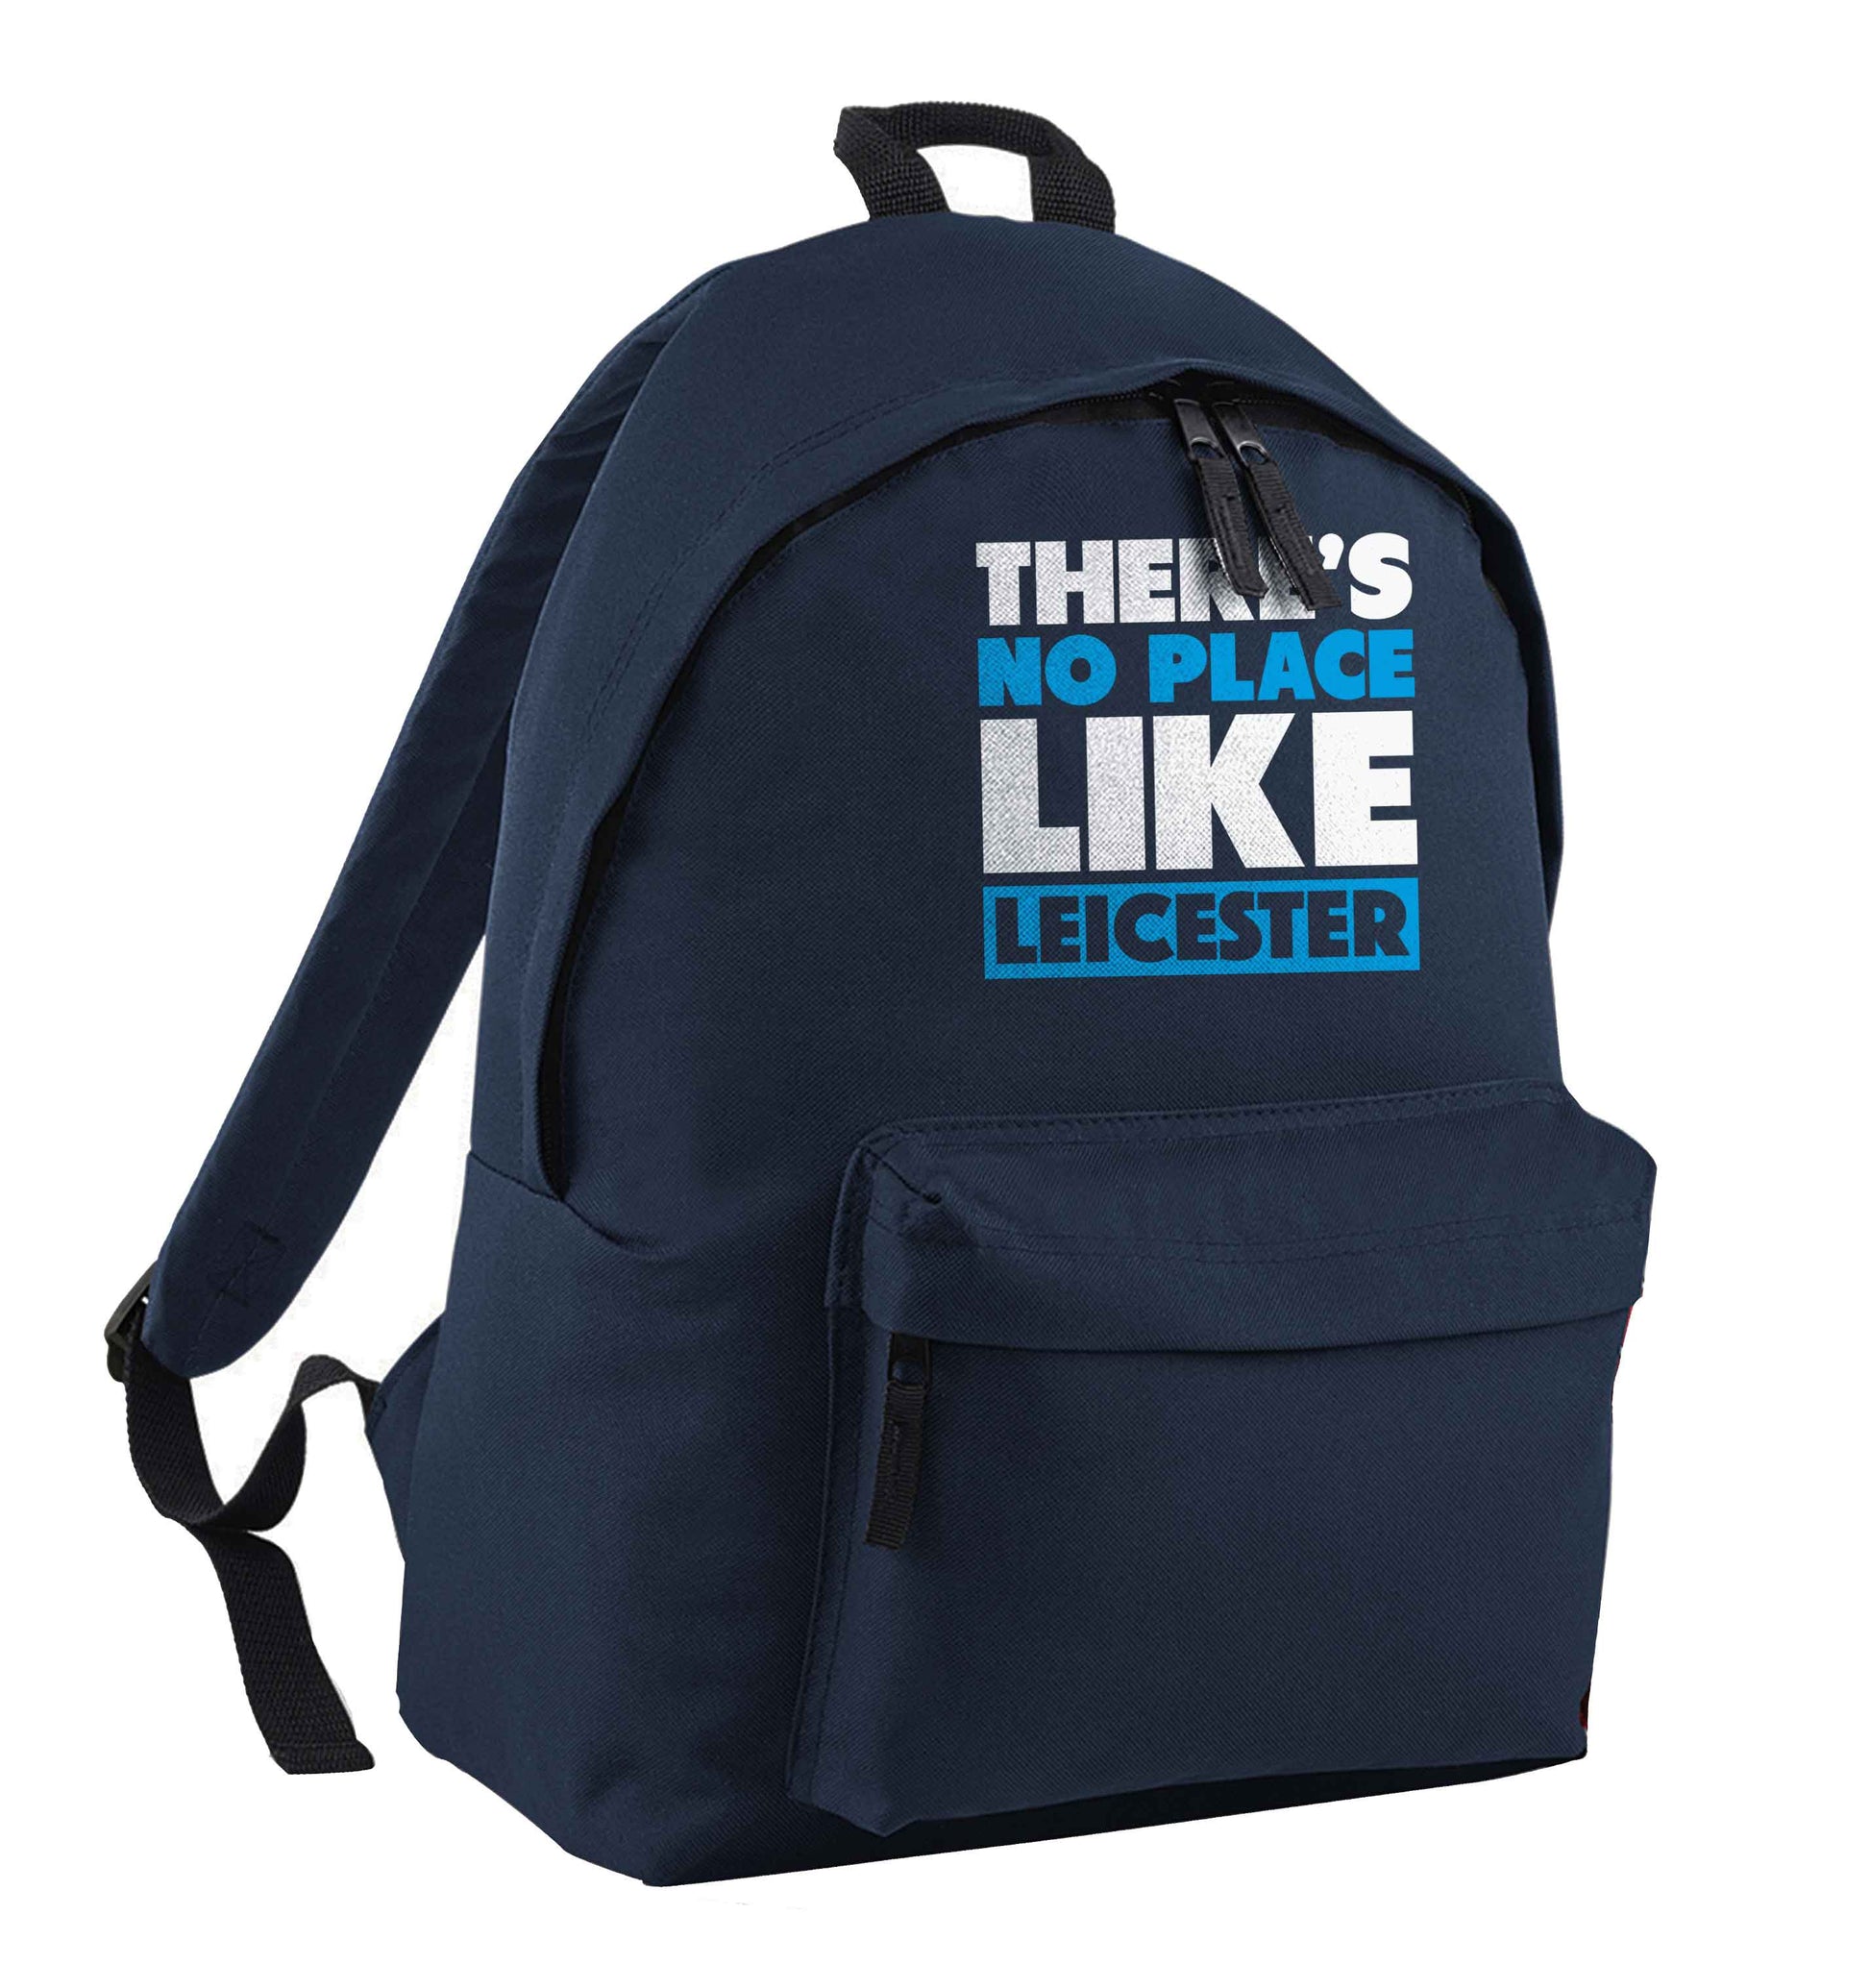 There's no place like Leicester navy adults backpack